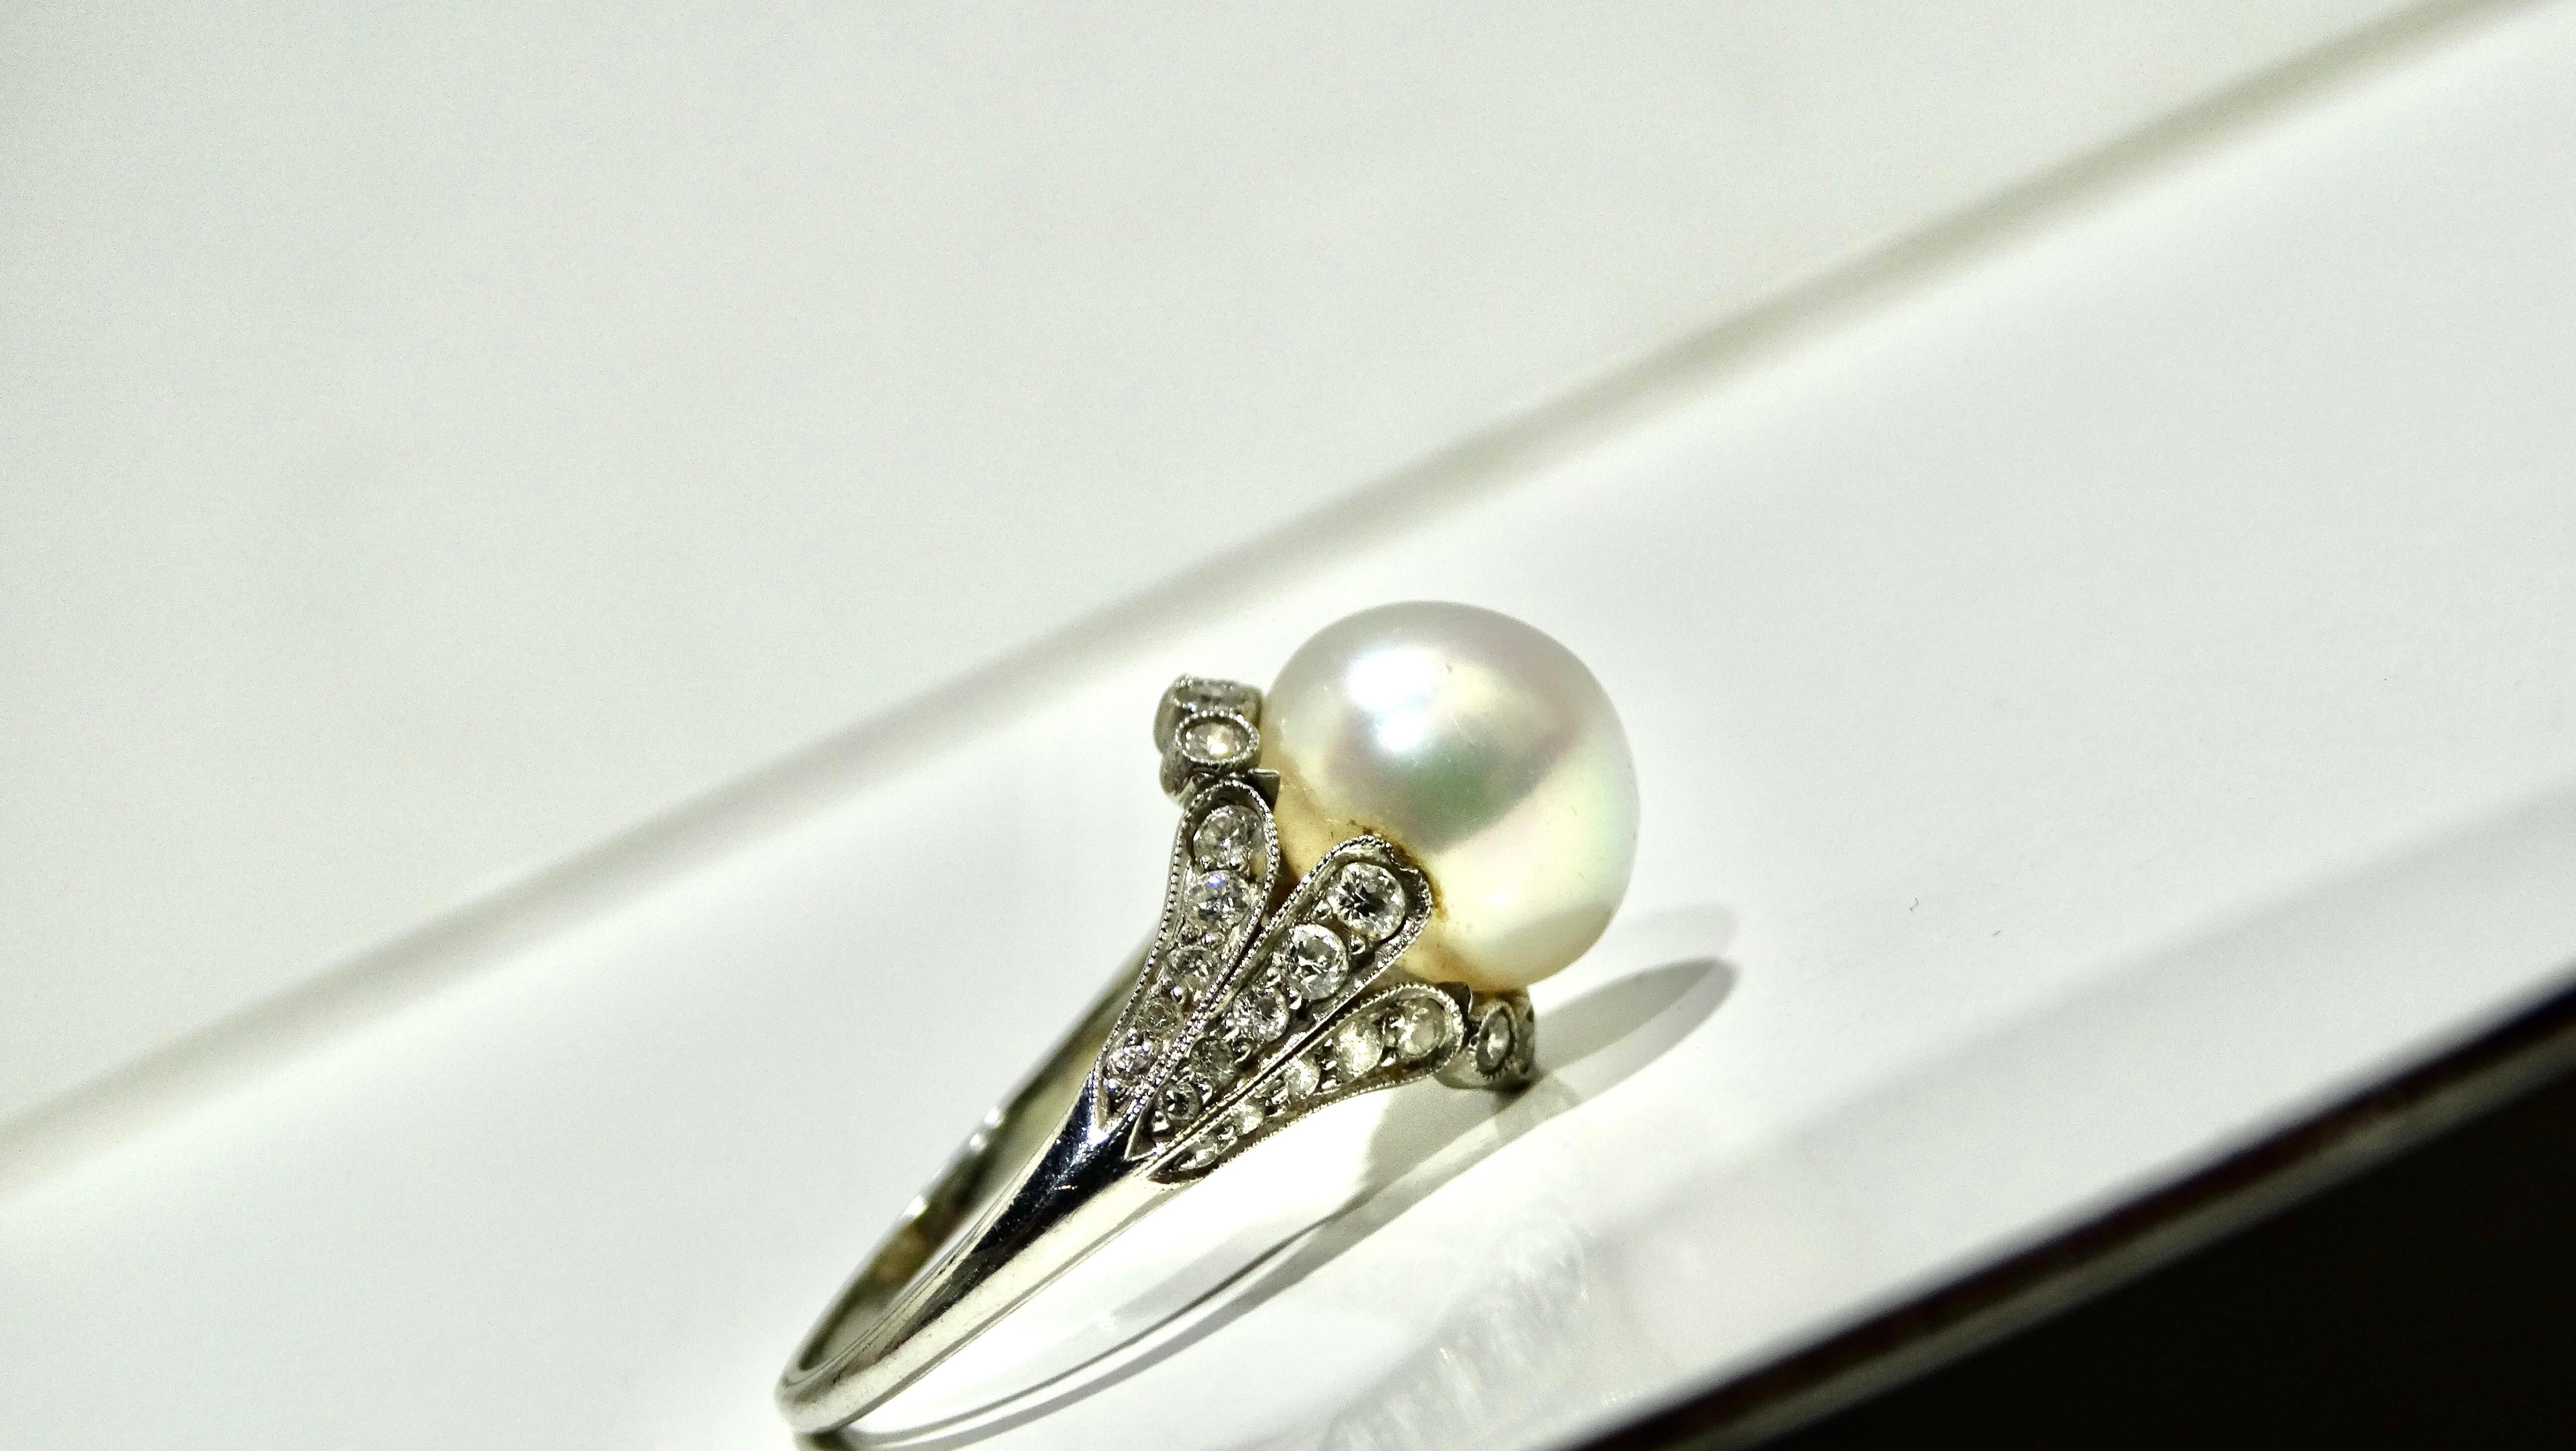 Beautiful Tiffany & Company button shape cultured pearl with 38 diamonds surrounding it. Roughly 0.56ctw. Platinum band with millegrain edges. Size 6 1/2 with horseshoe size. This ring would be a beautiful ring on its own or paired with your other